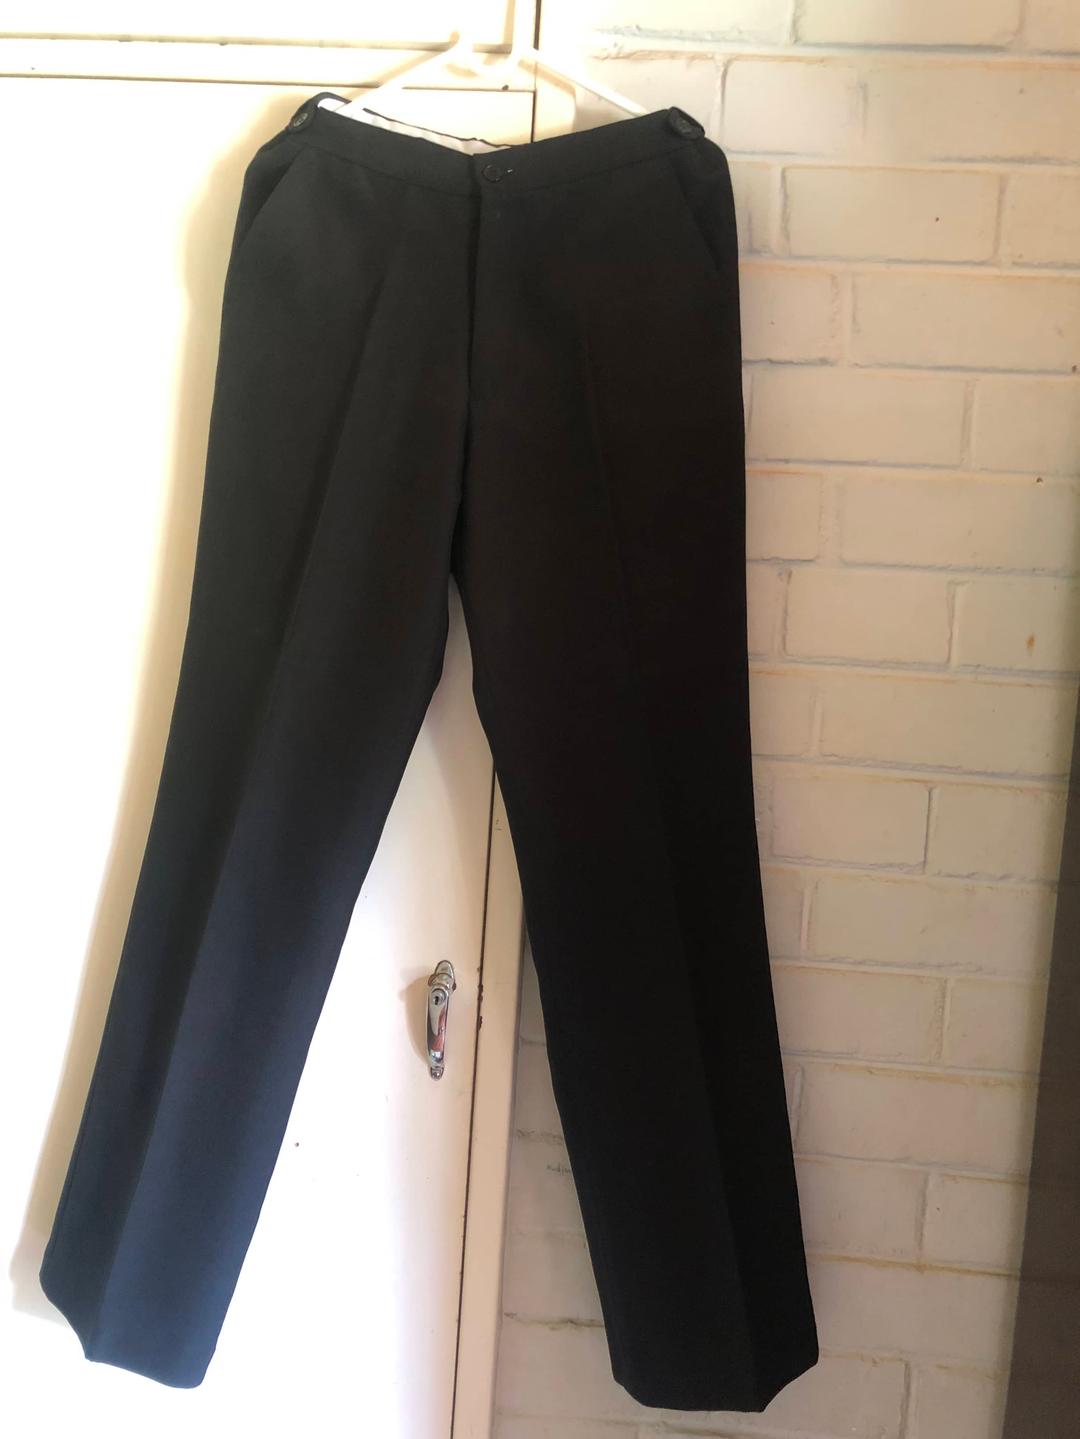 2nd hand girl’s school trousers